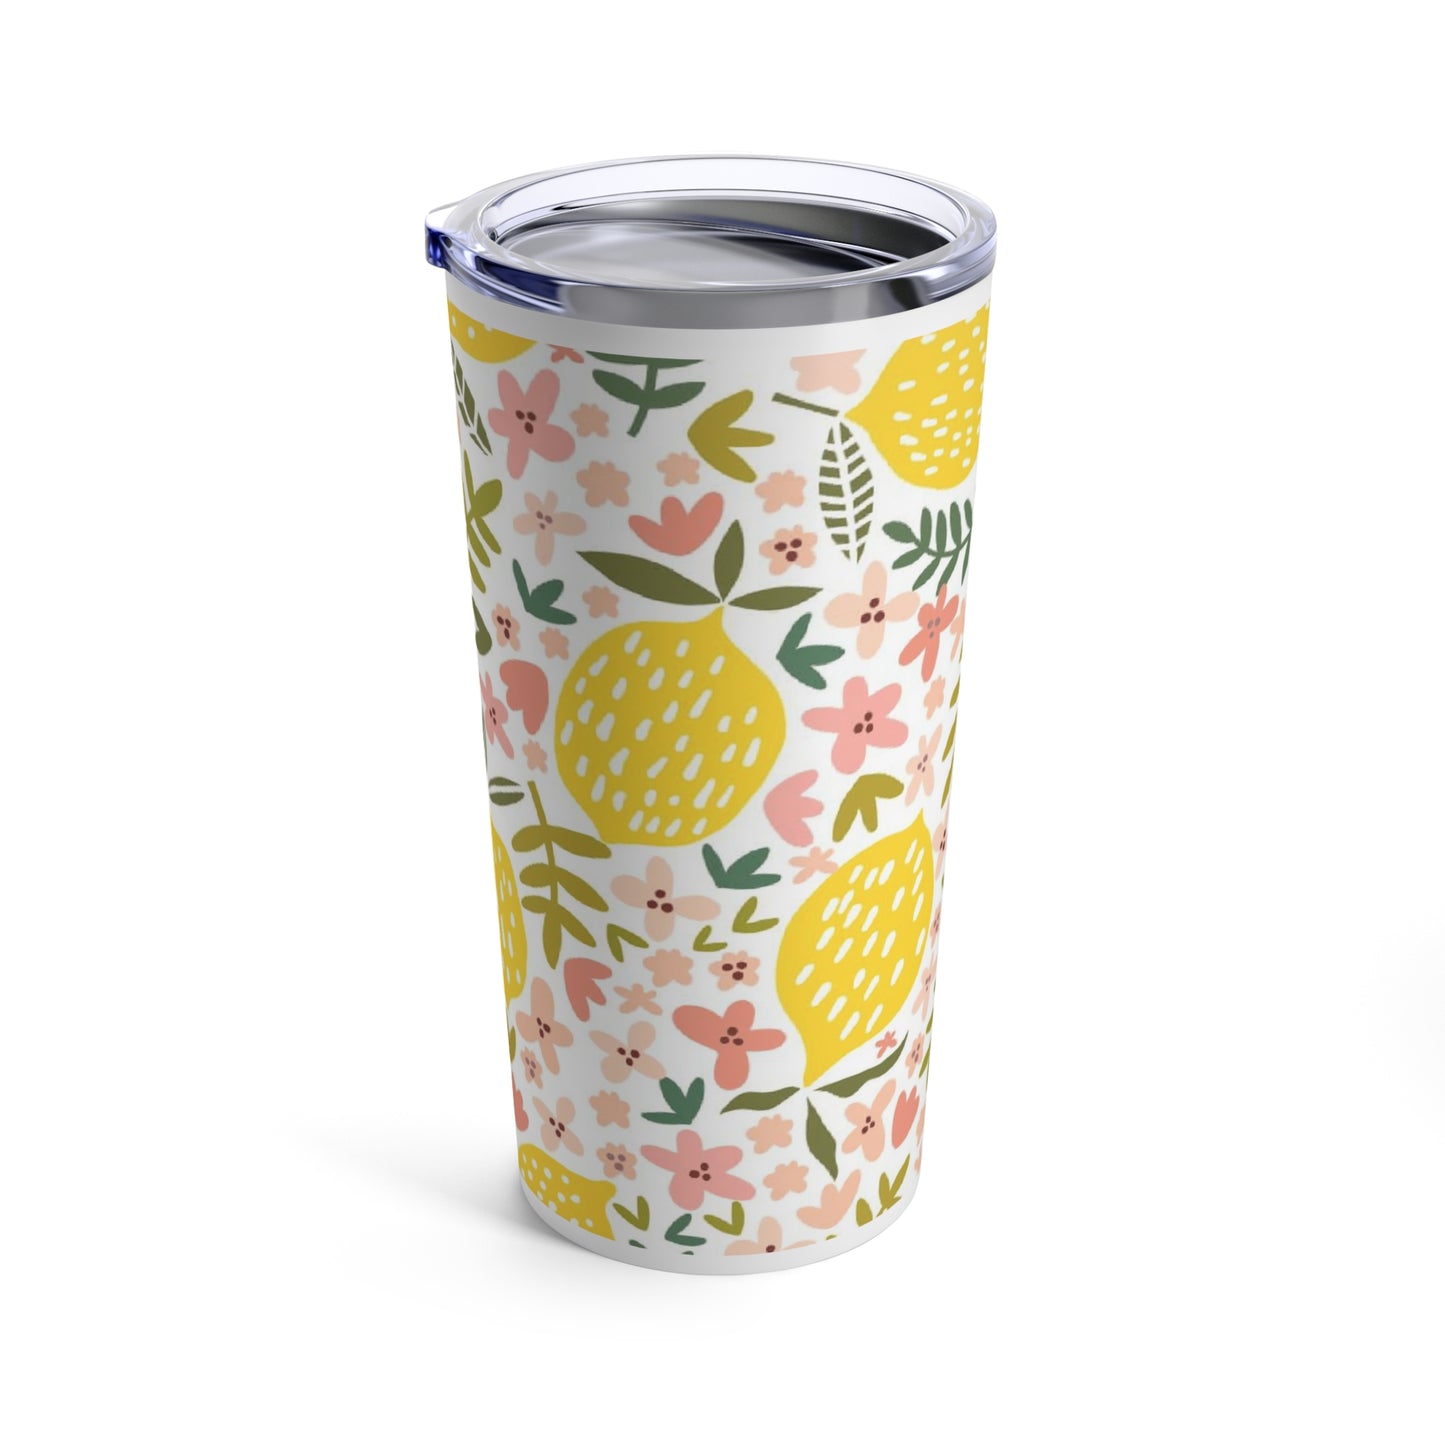 A Printify Pink Lemon Tumbler: 20 oz.; Insulated; Stainless steel with lemons and flowers on it, featuring dishwasher safe stainless steel construction.